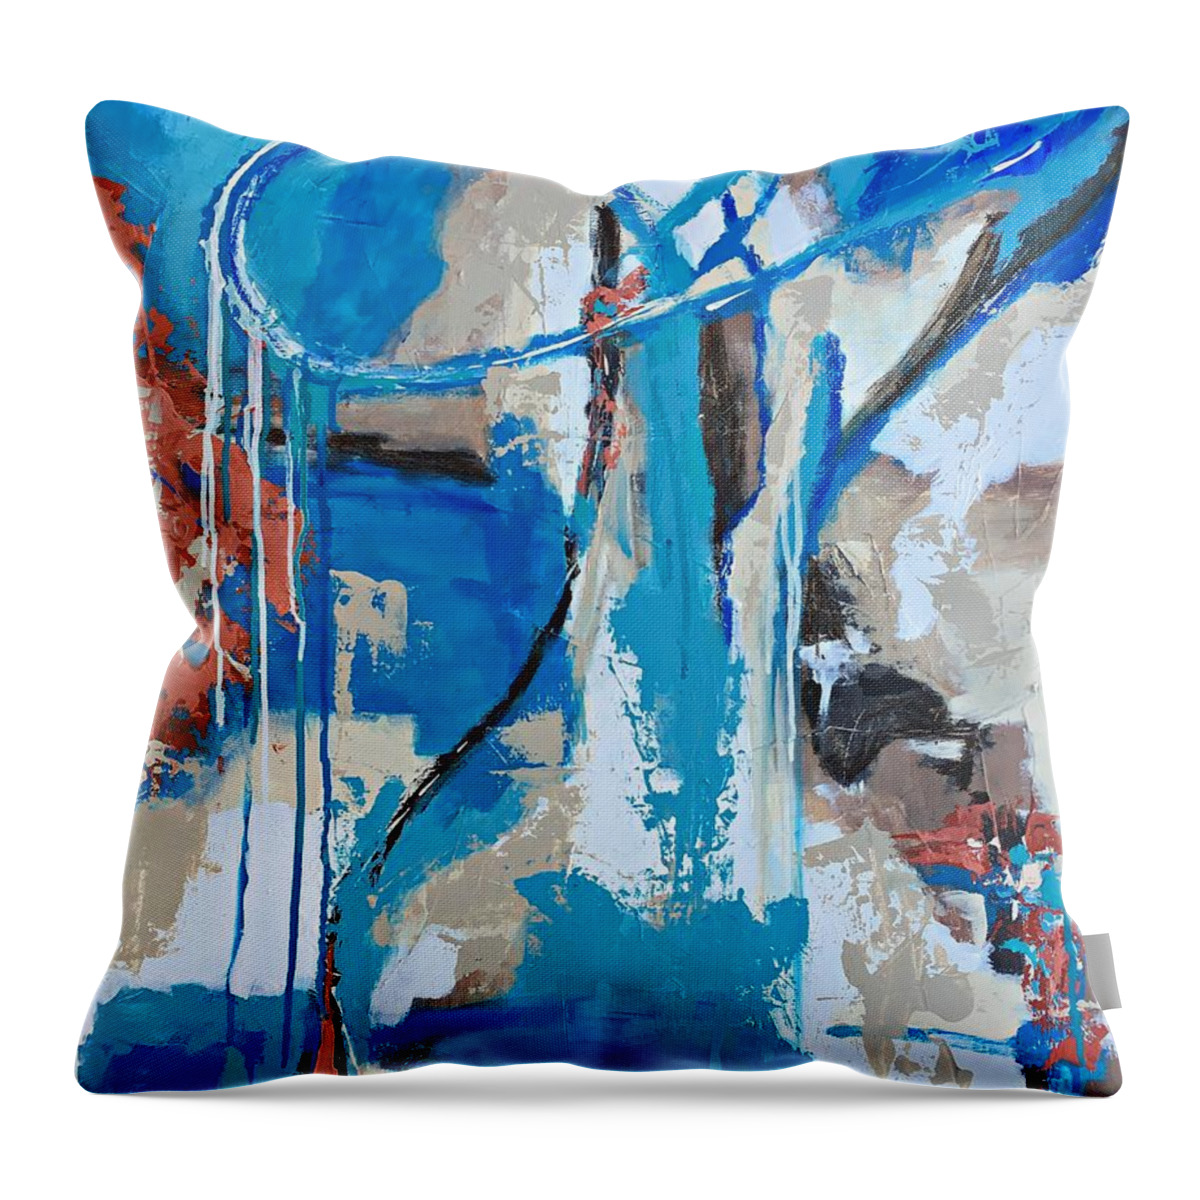 Abstract Throw Pillow featuring the painting A Conscience Breath by Mary Mirabal